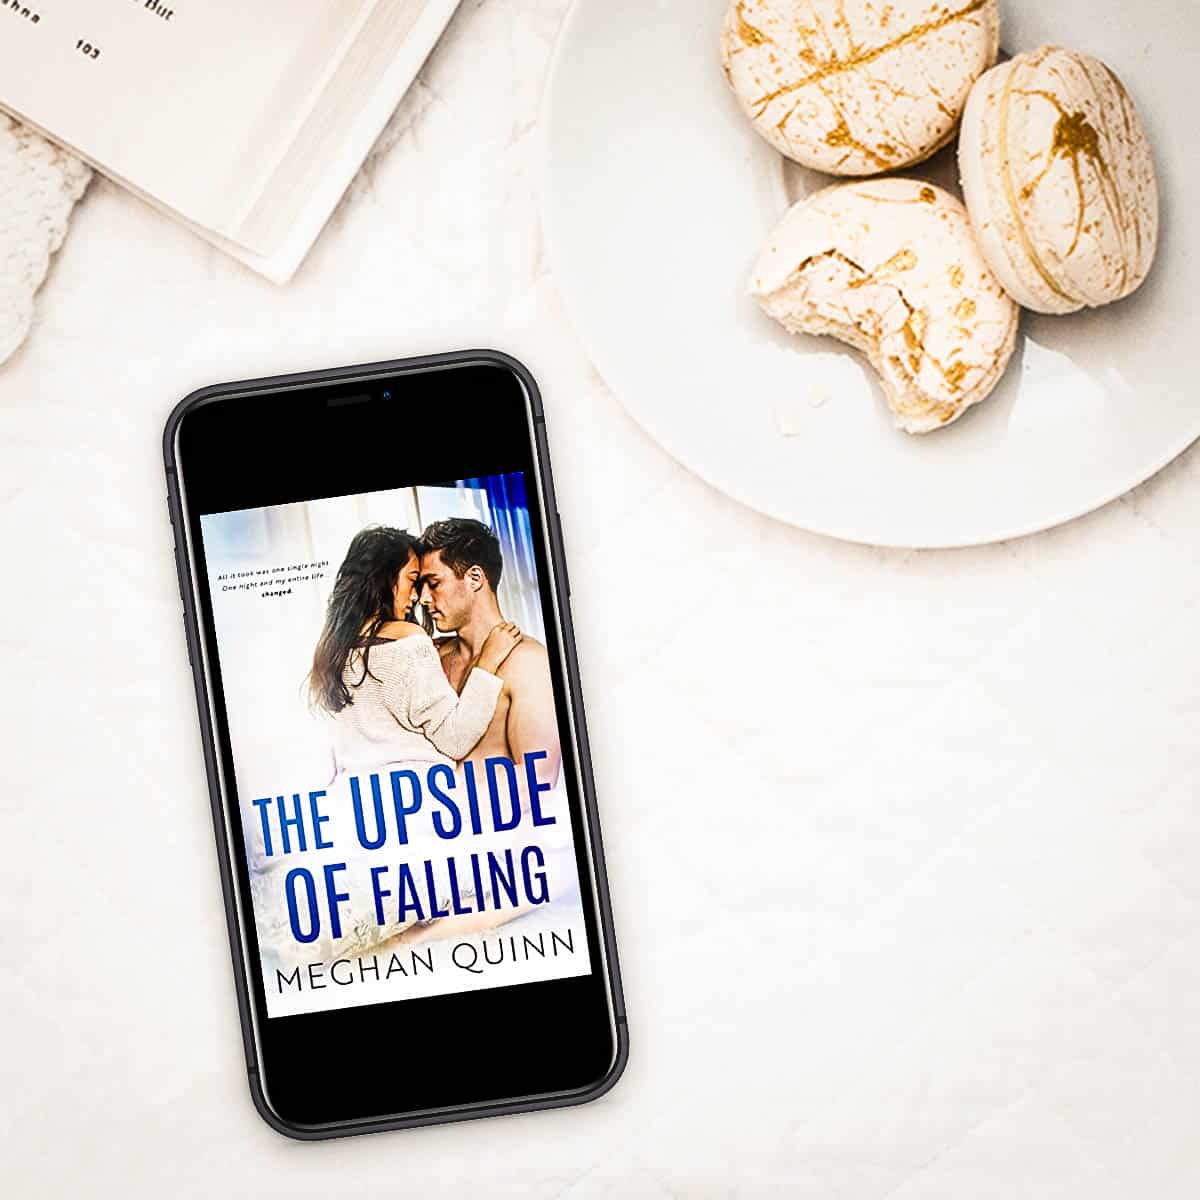 The Upside of Falling by Meghan Quinn – The Blue Line Duet Book 1